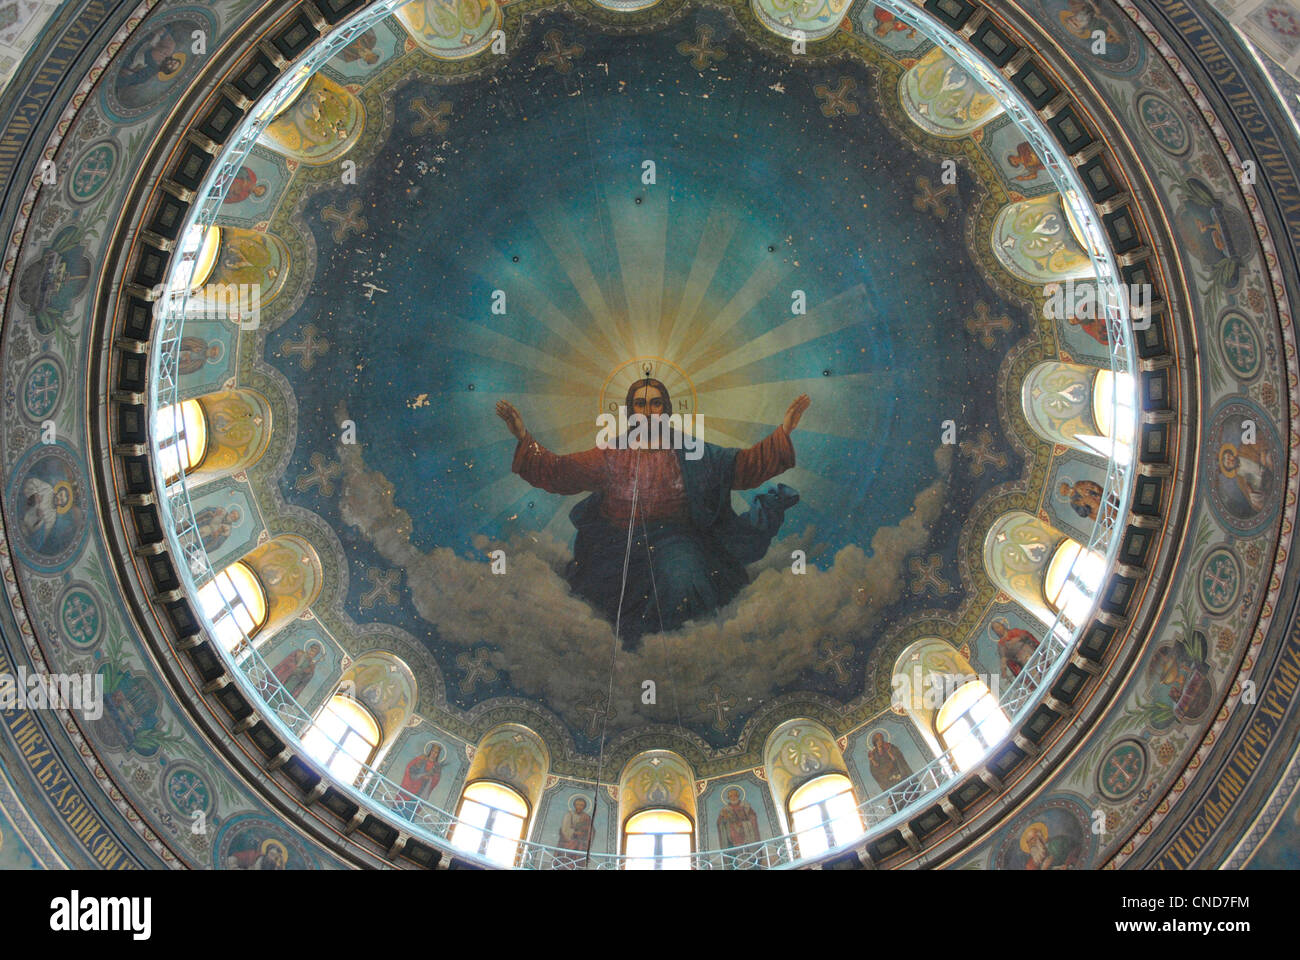 Ukraine. Crimea. Yevpatoria. Cathedral of St. Nicholas the Miracle Worker. Dome. Christ in Majesty. Stock Photo